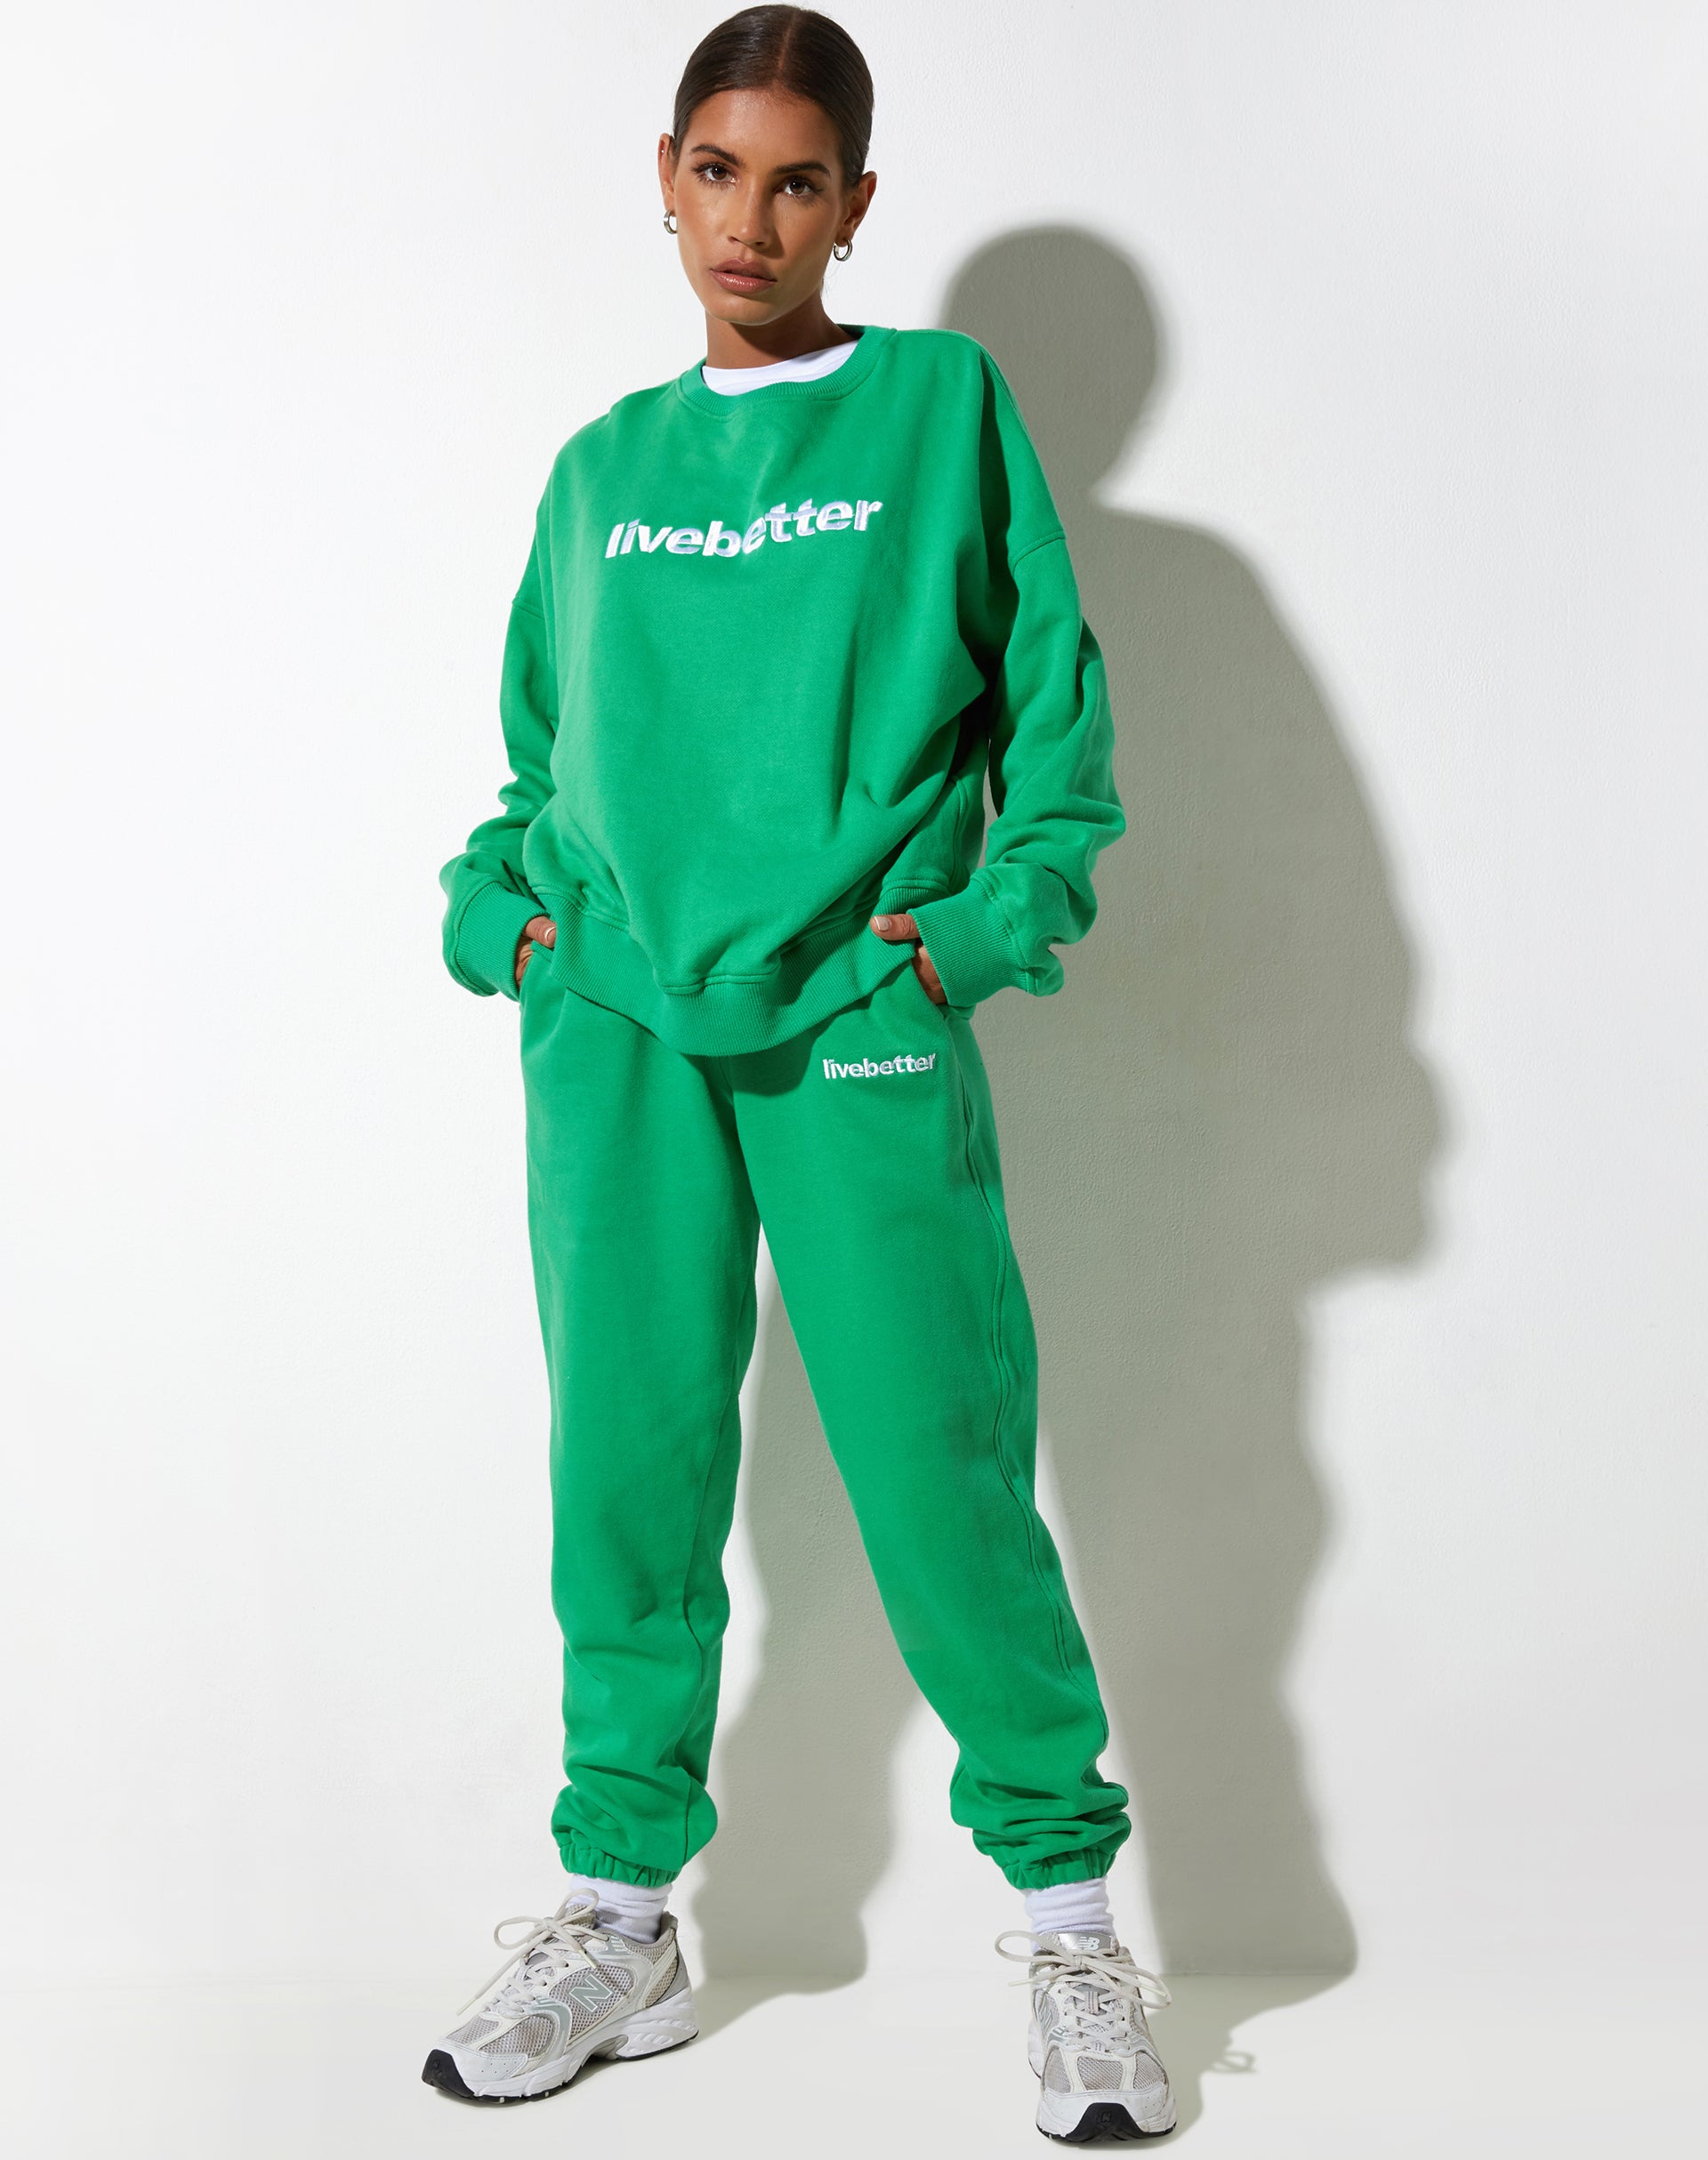 image of Basta Jogger in Fun Green with "Live Better" Embro